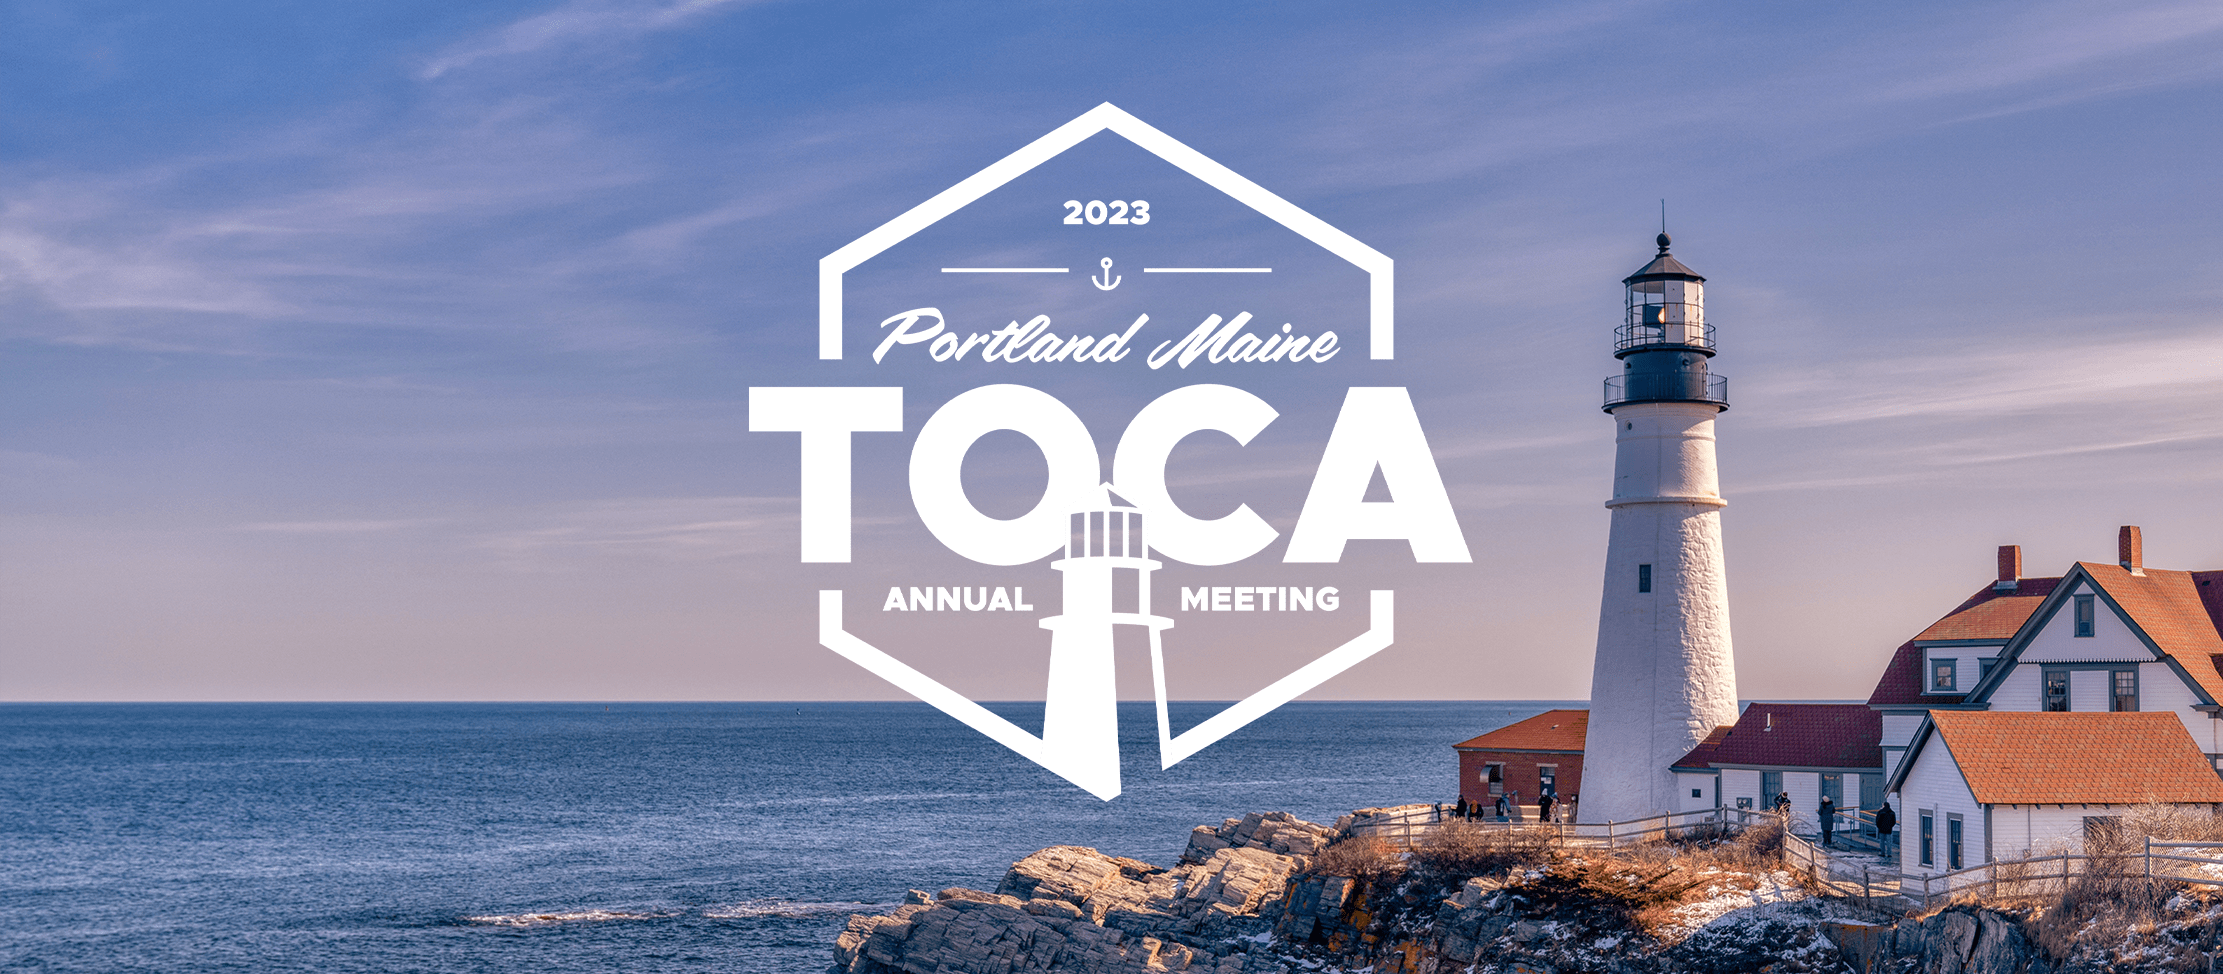 TOCA logo on a lighthouse scene in Maine